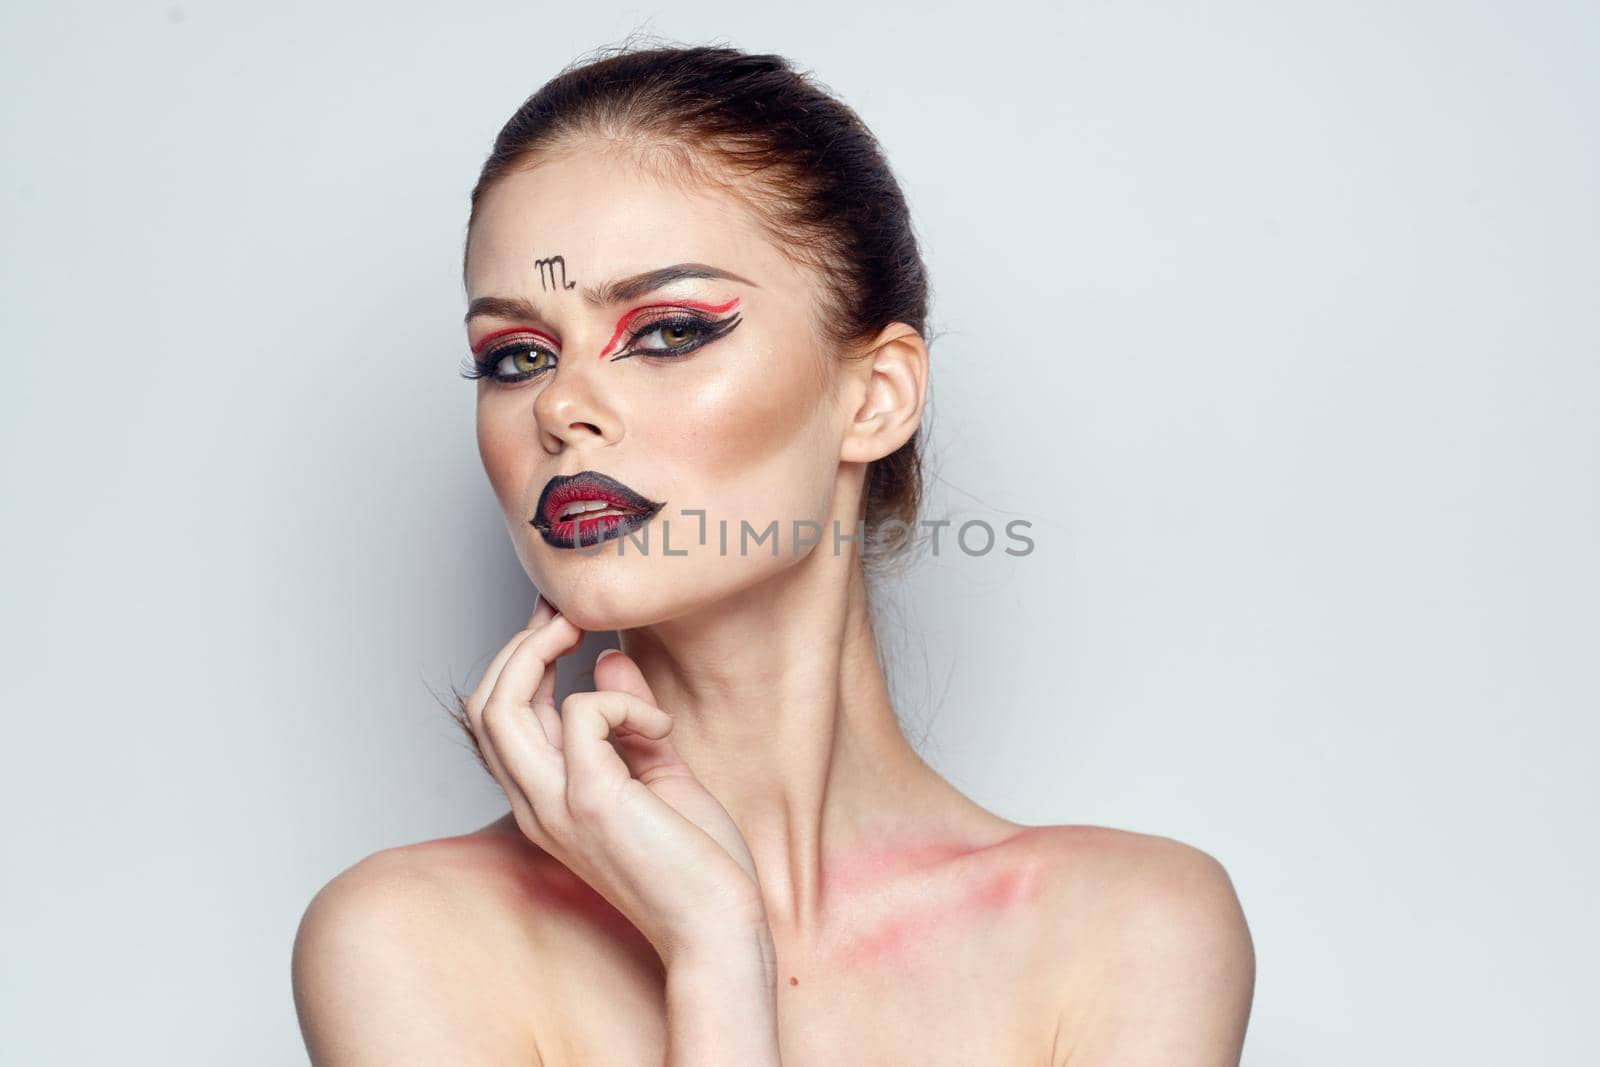 attractive woman posing scorpio sign on forehead cosmetics light background by Vichizh